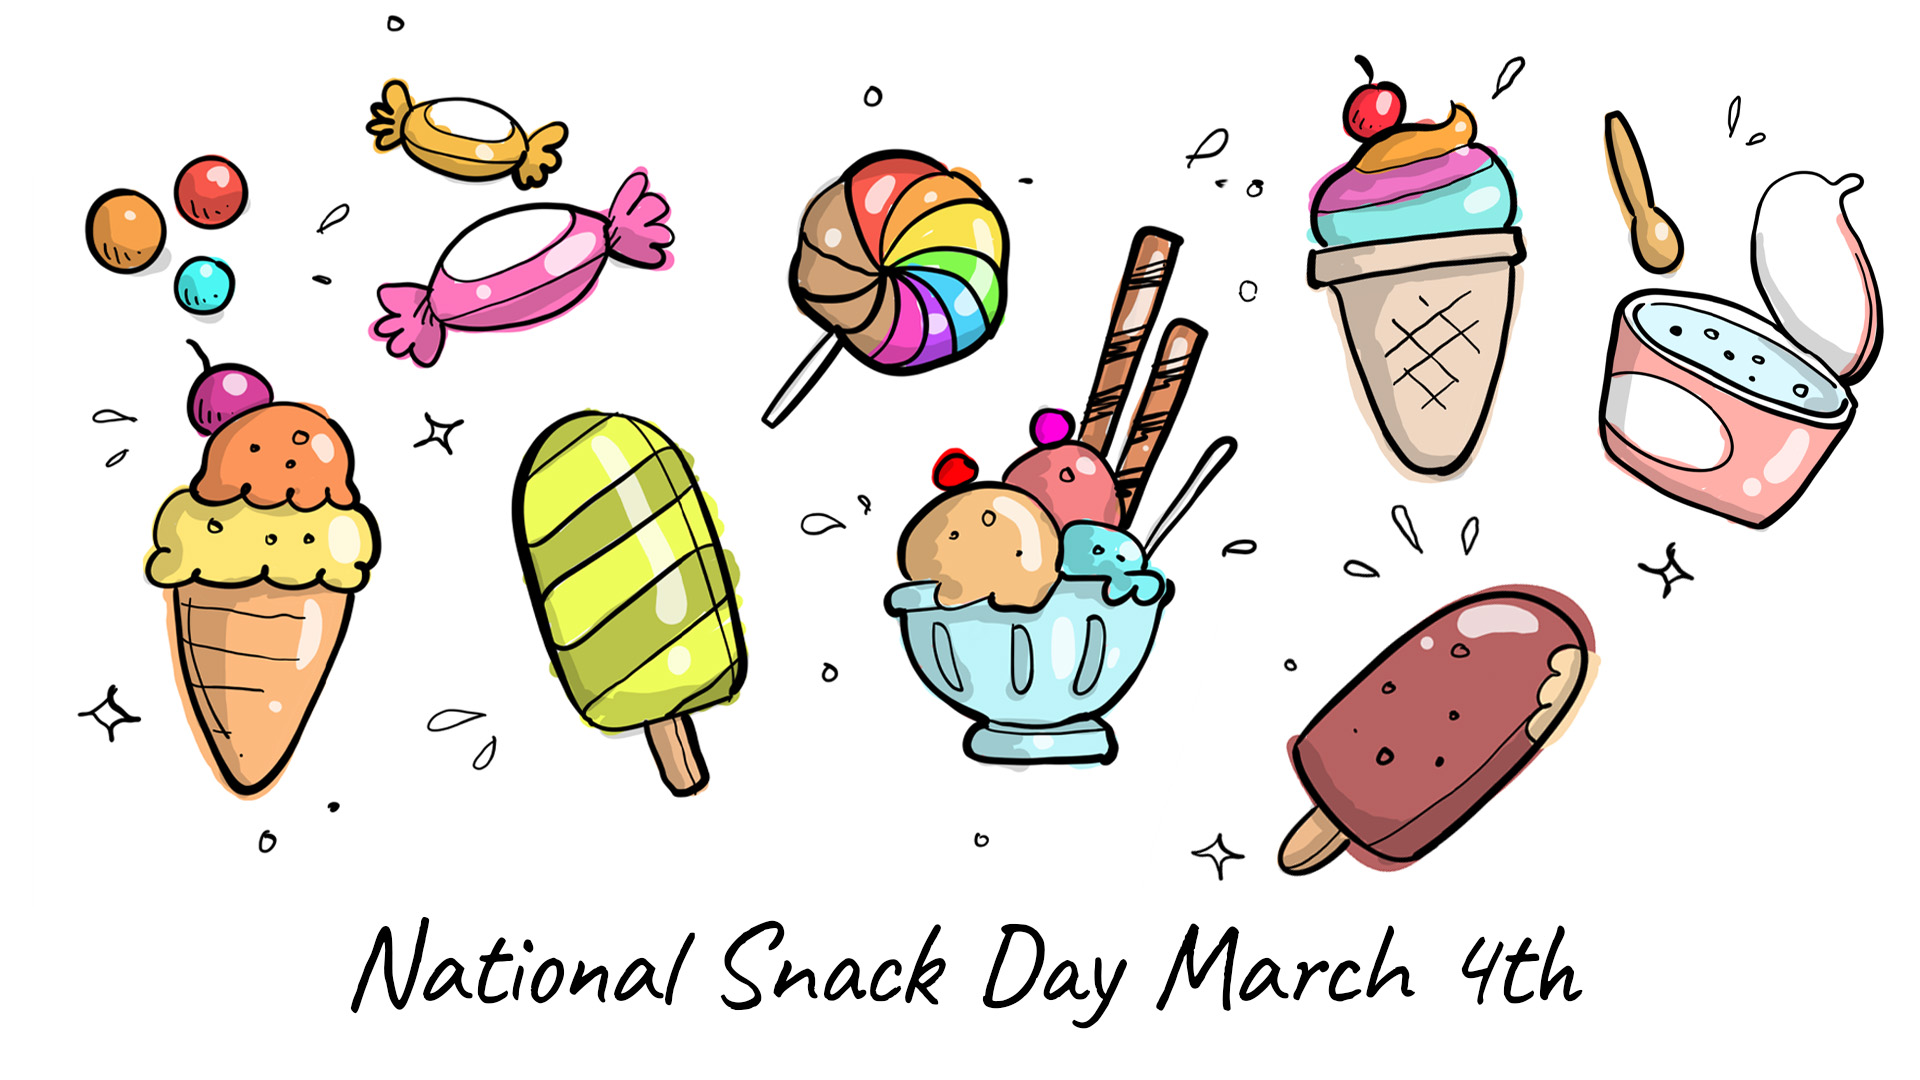 illustrated drawn colorful images of a lollipop, ice cream sundae, ice cream cone, hard candies, popsicle stick. National Snack Day March 4th written across the bottom if the screen in handwritten font.